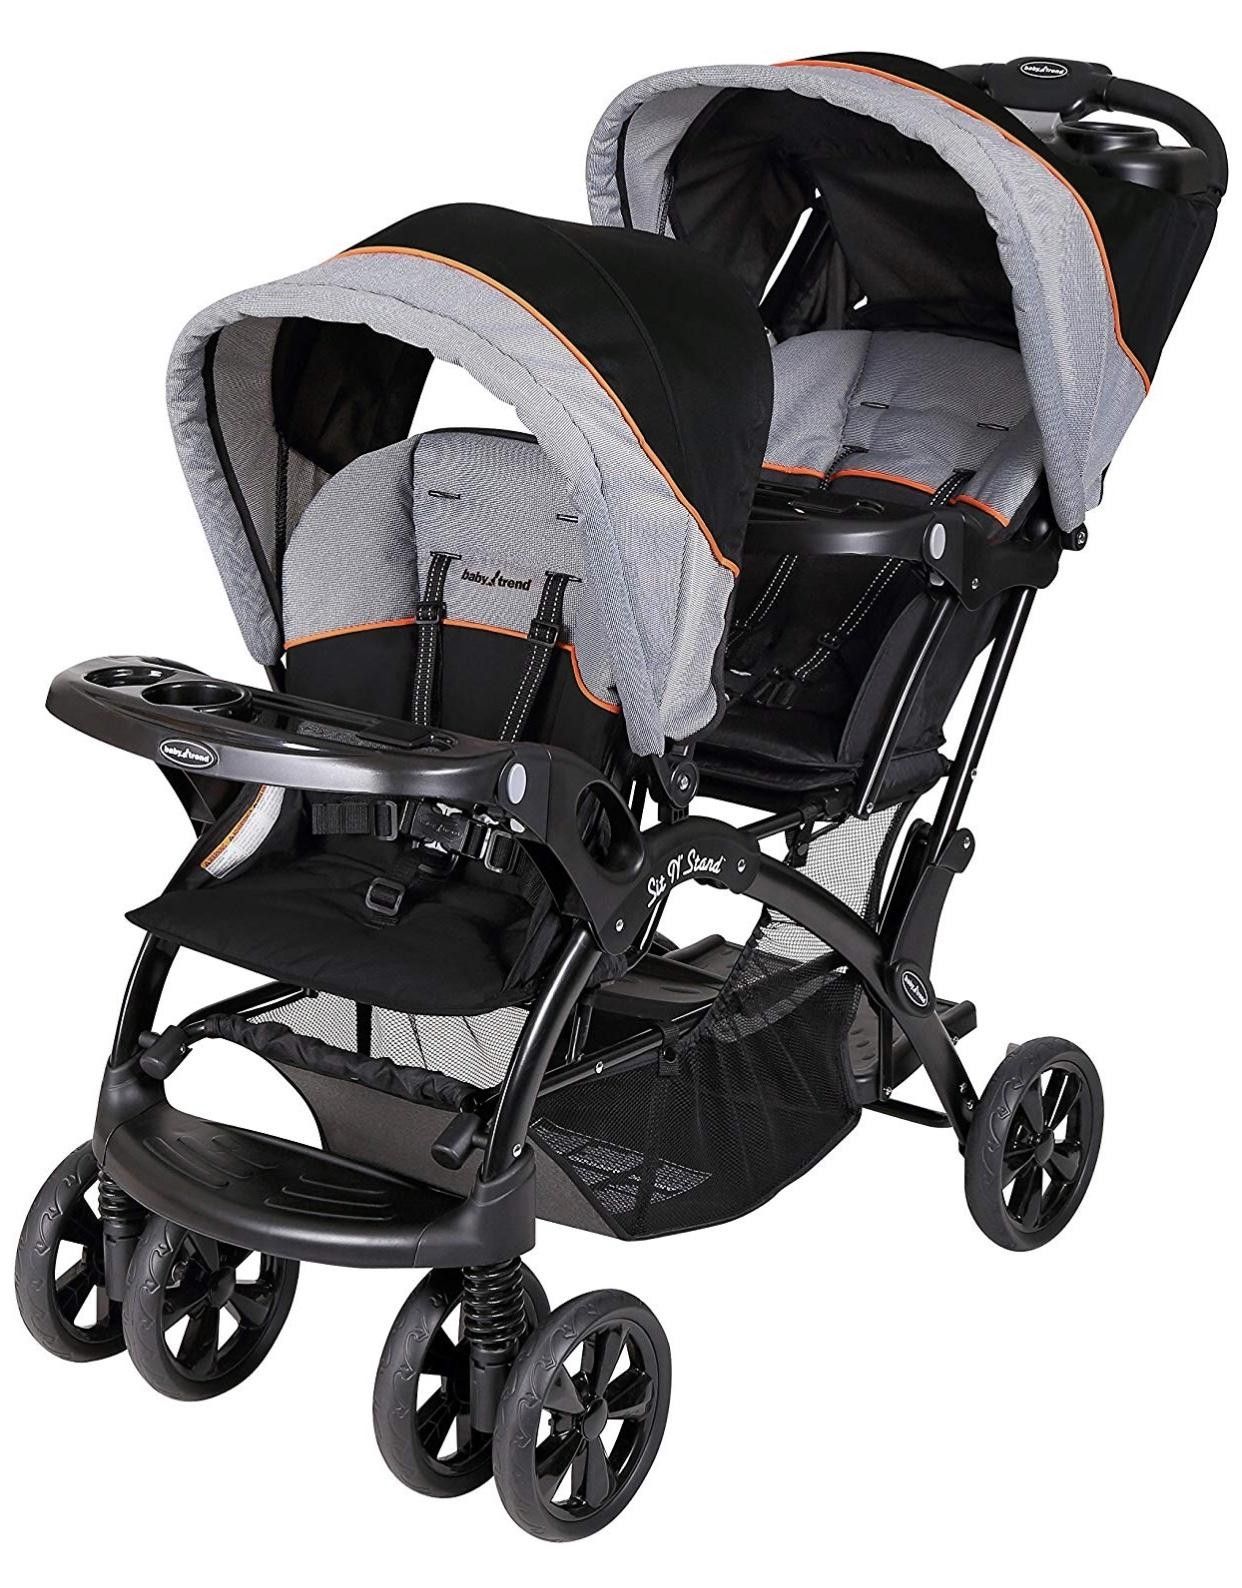 Baby Trend Sit and stand double stroller